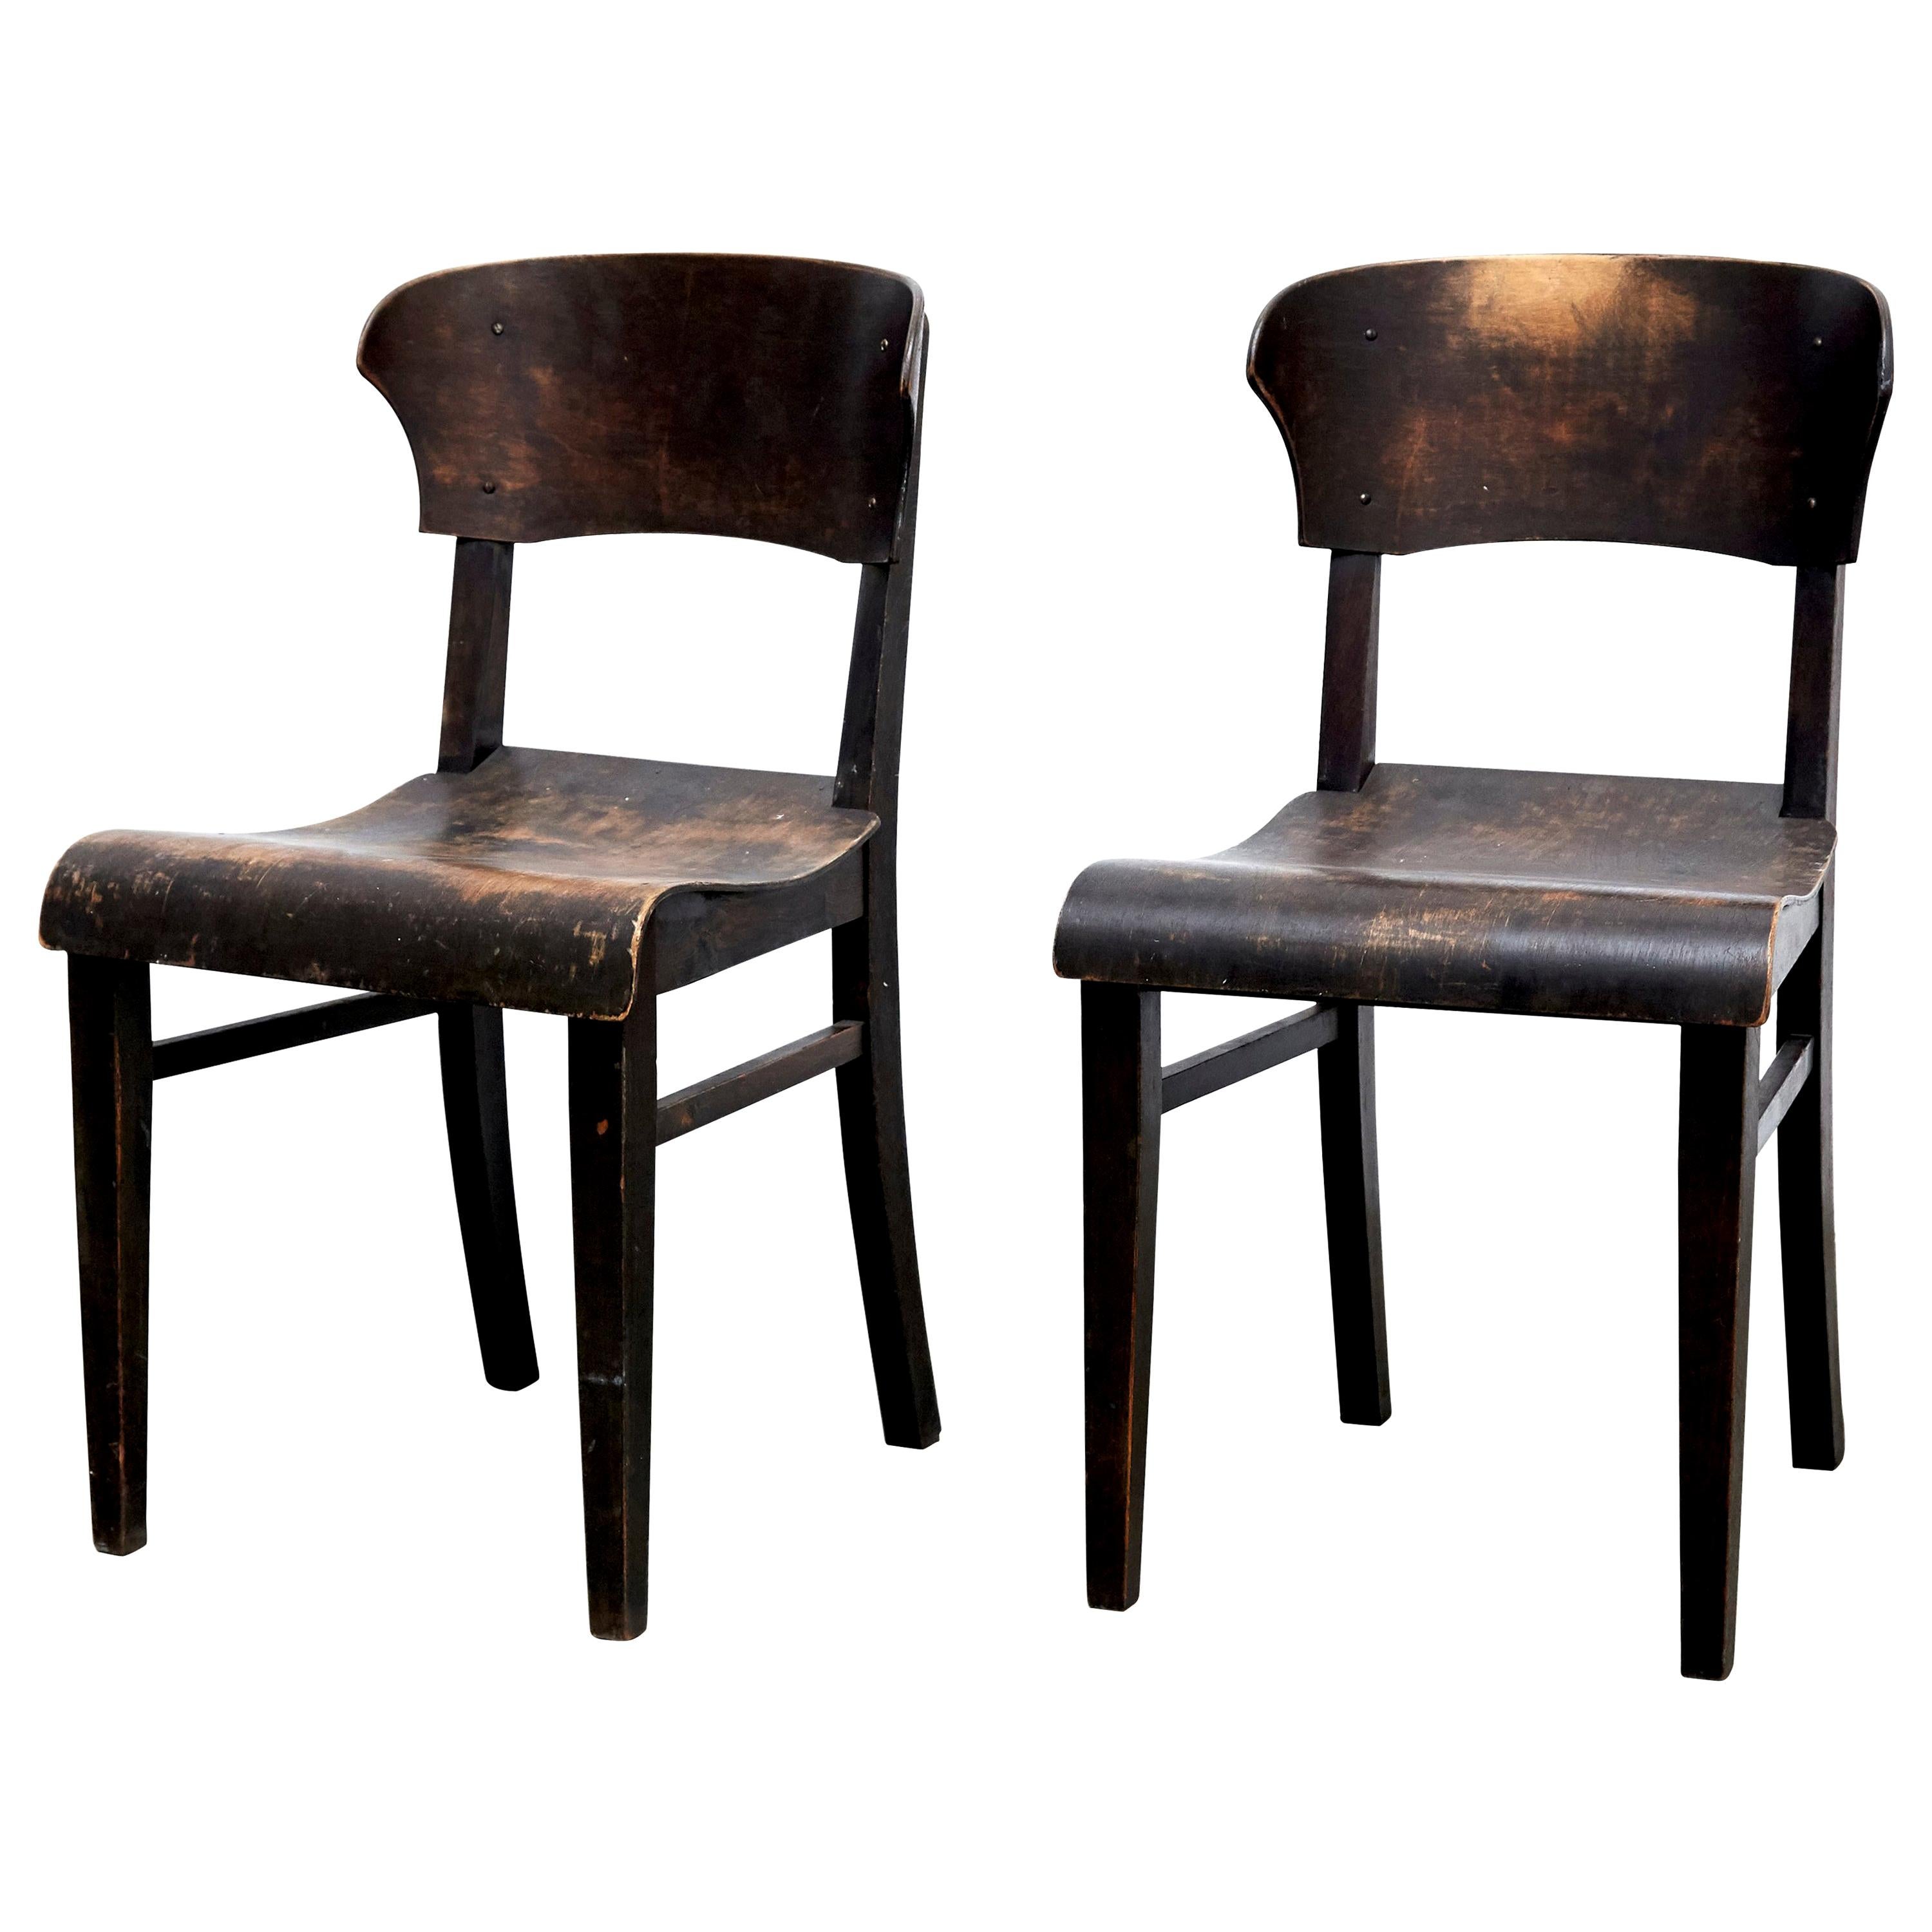 Pair of Wooden Chairs in Style of Rockhausen, circa 1925